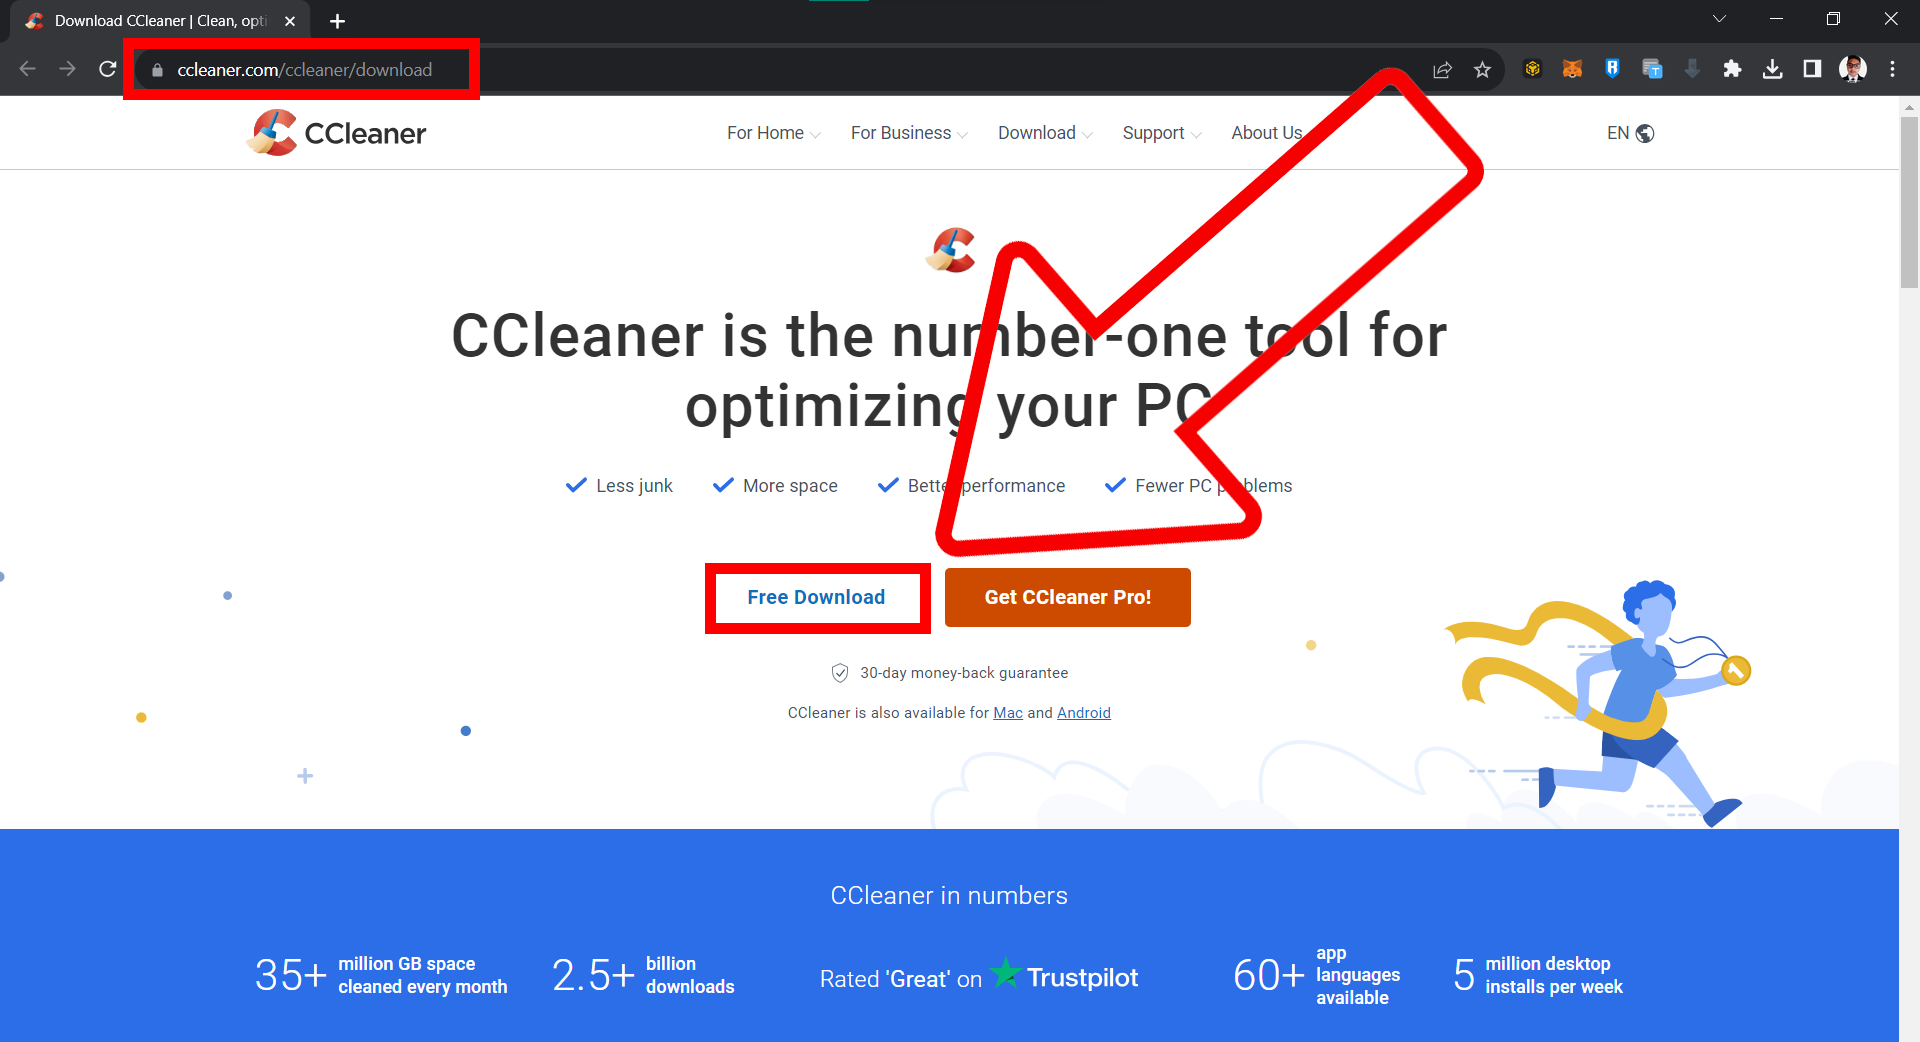 How To Use CCleaner to Remove Duplicate Files: Step 1